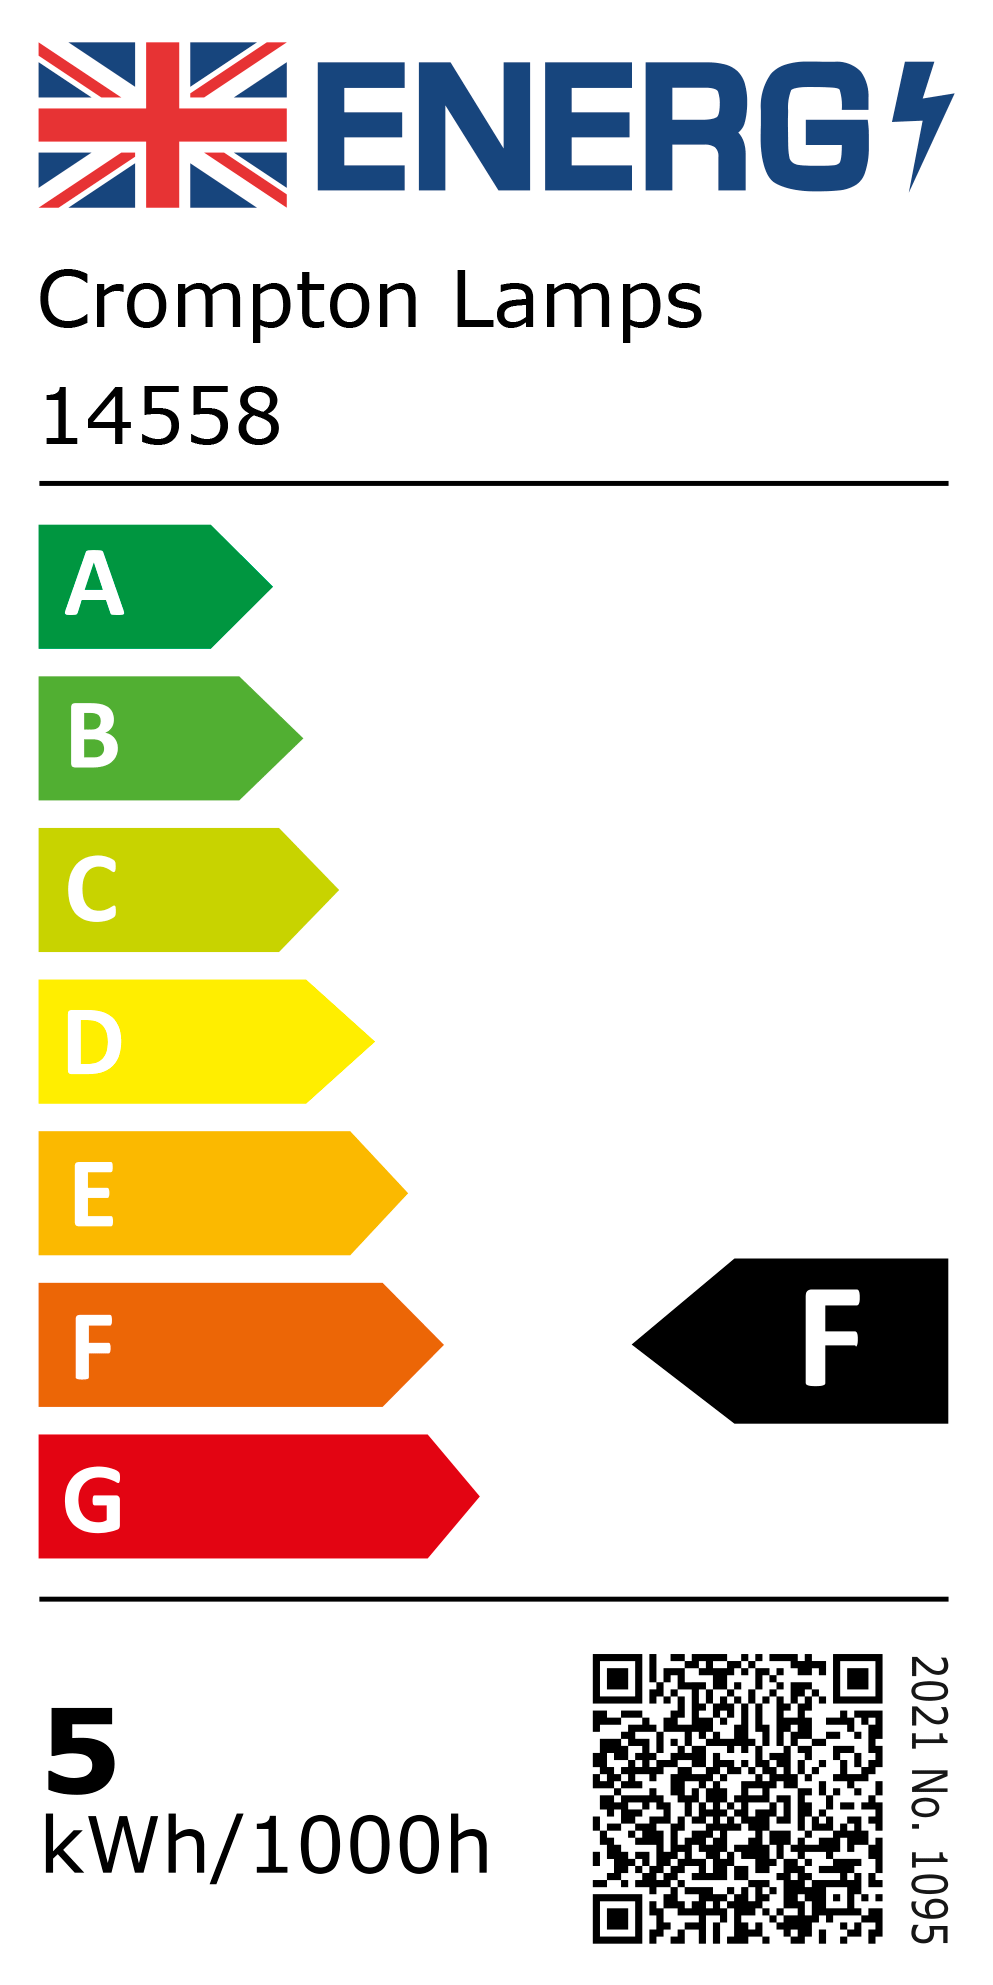 New 2021 Energy Rating Label: Stock Code 14558